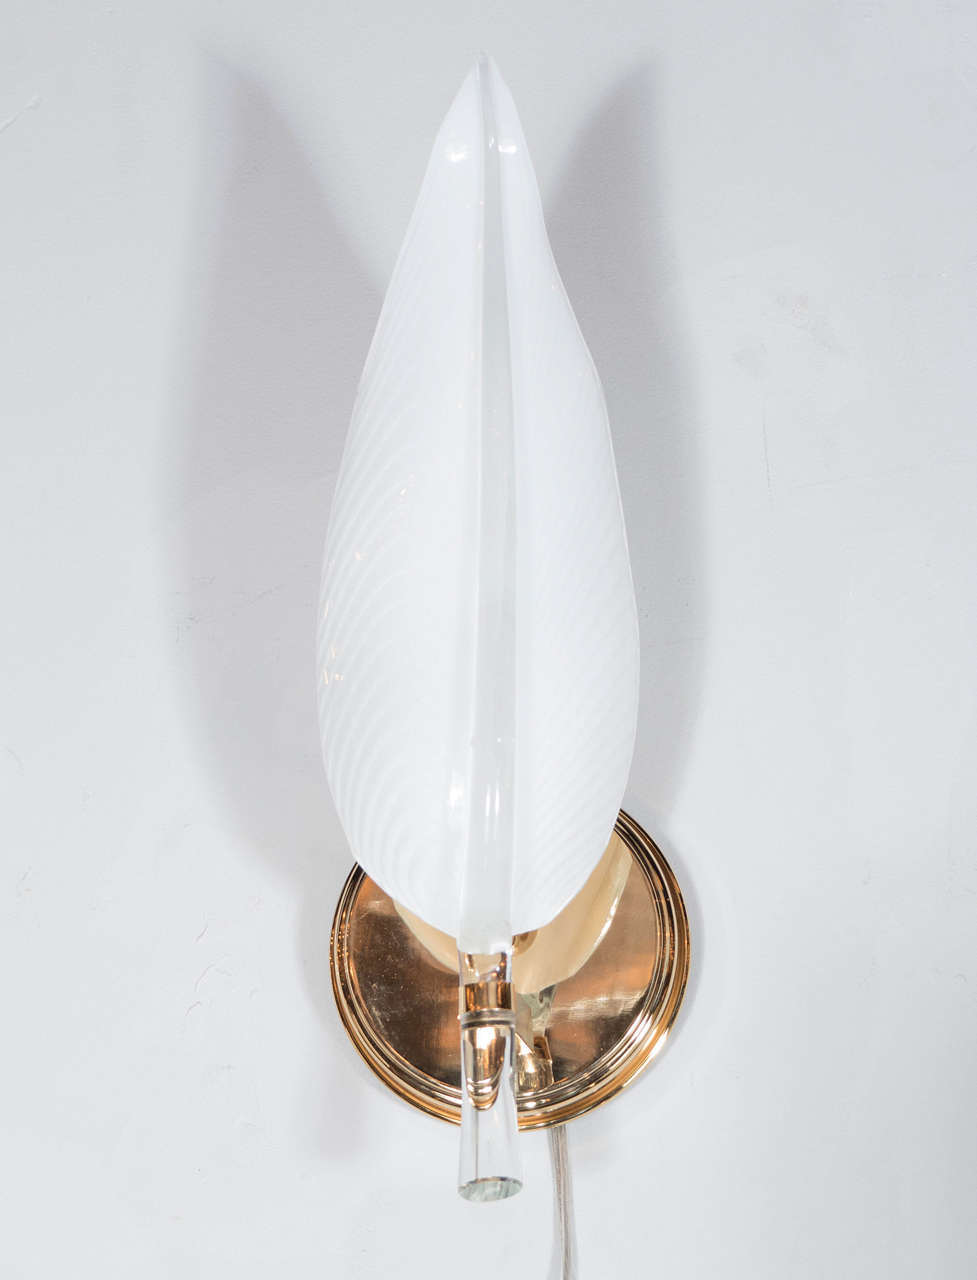 Italian Pair of Mid-Century Modernist Murano Glass Leaf Sconces by Barovier e Toso